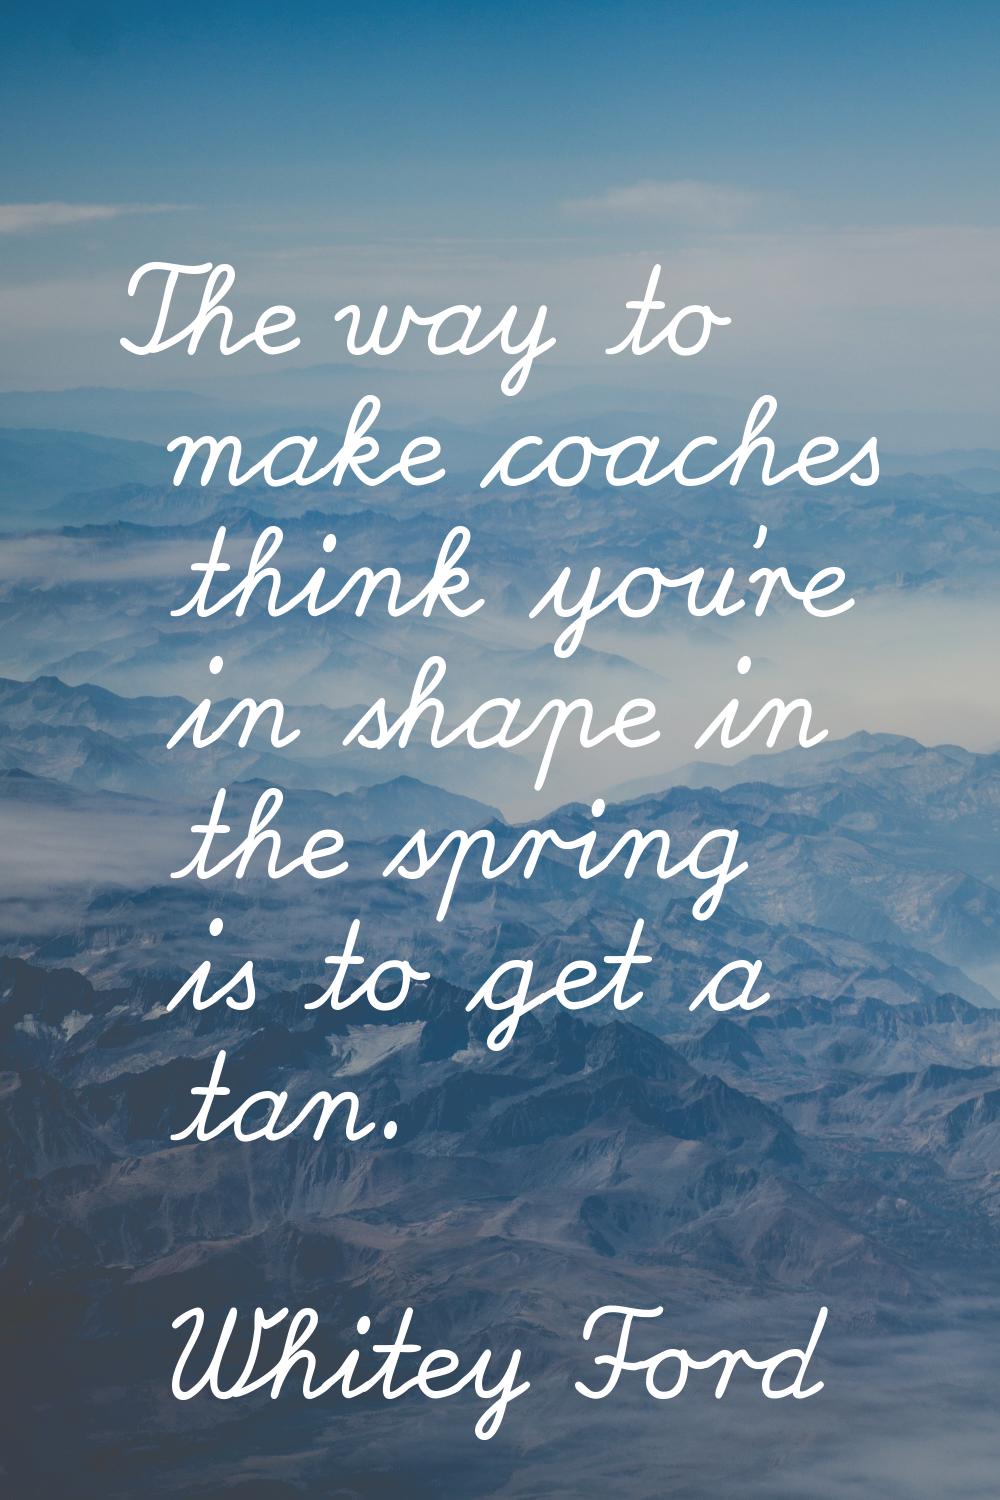 The way to make coaches think you're in shape in the spring is to get a tan.